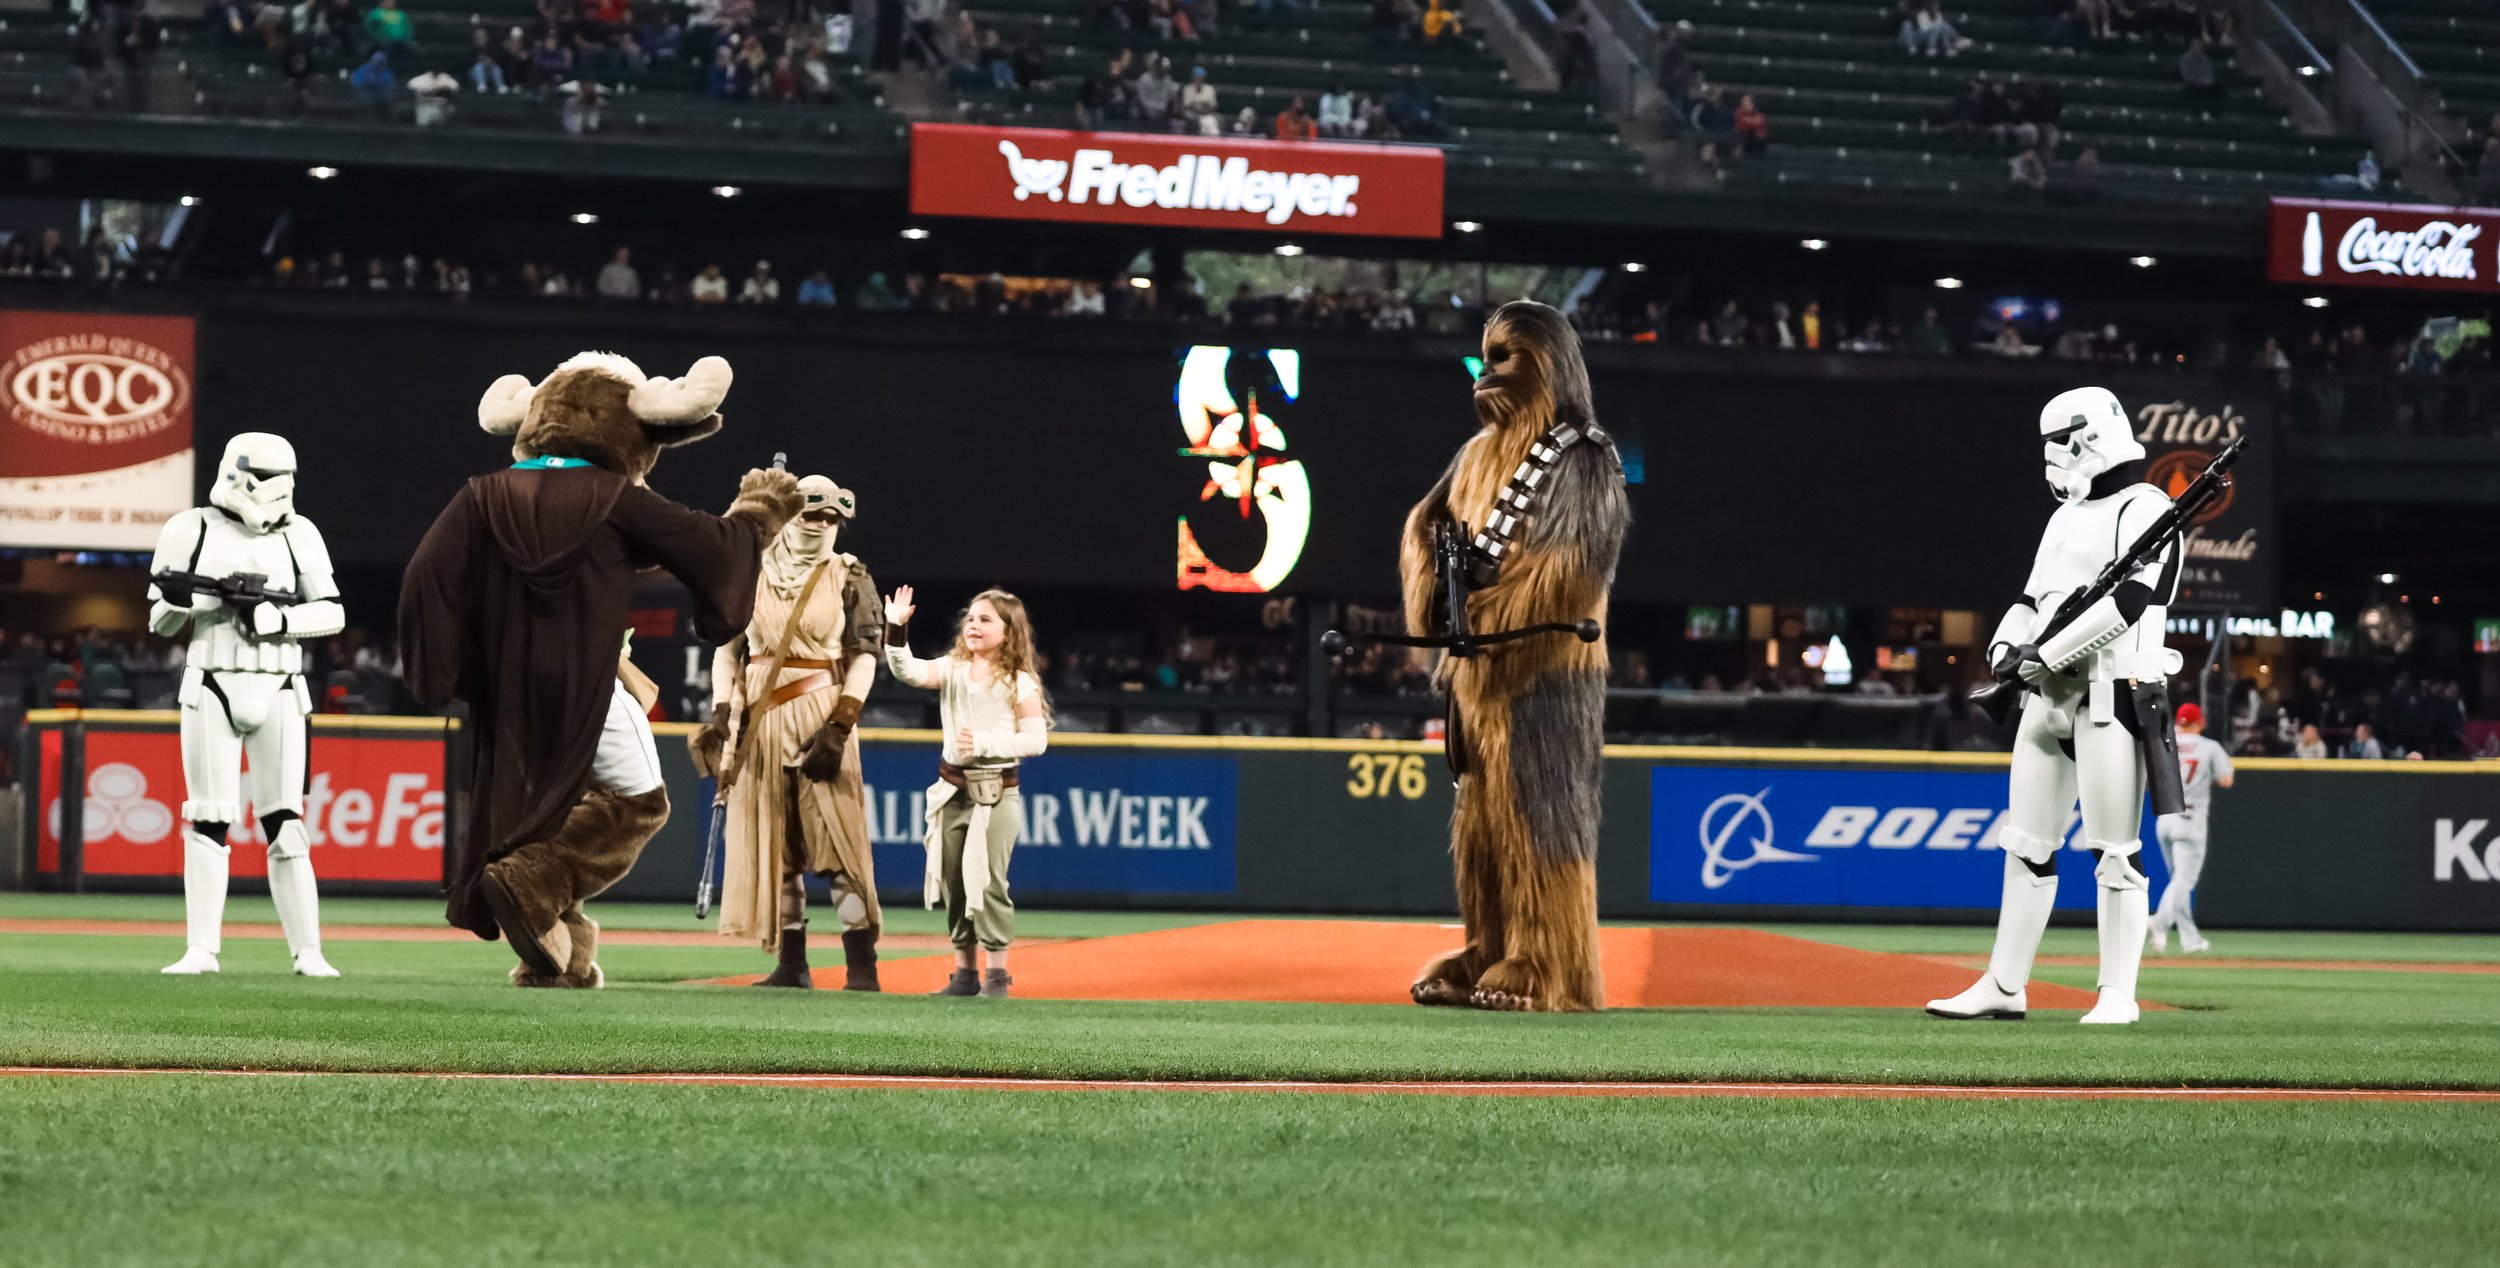 Mariners get a dominant win against Angels on Star Wars night